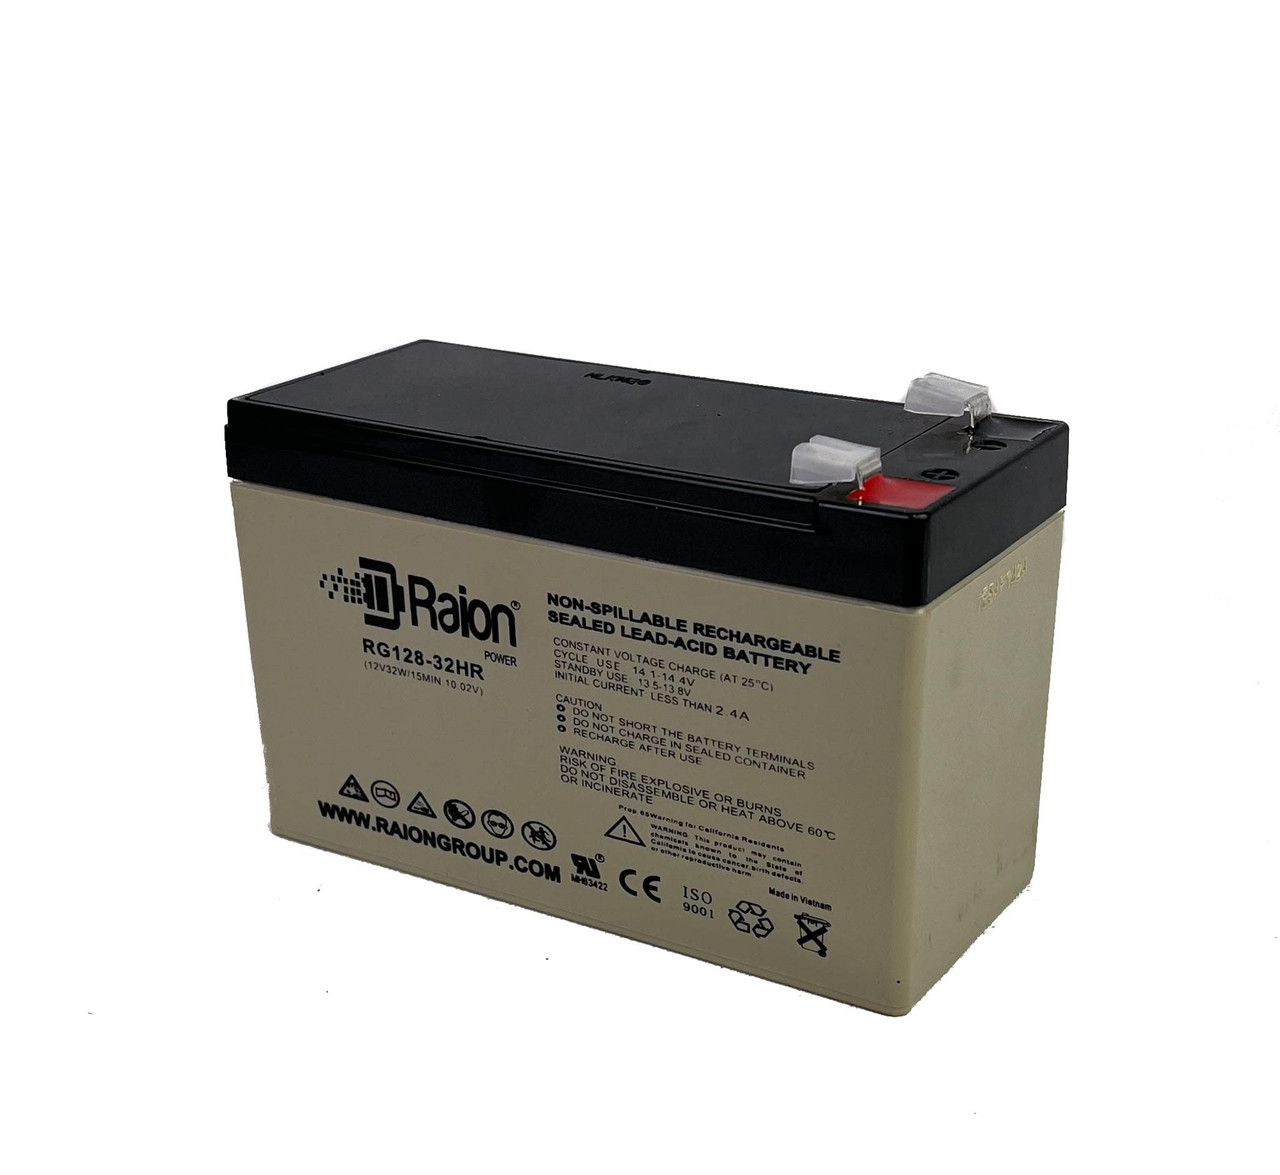 Raion Power RG128-32HR 12V 7.5Ah Replacement UPS Battery Cartridge for Minuteman AT650